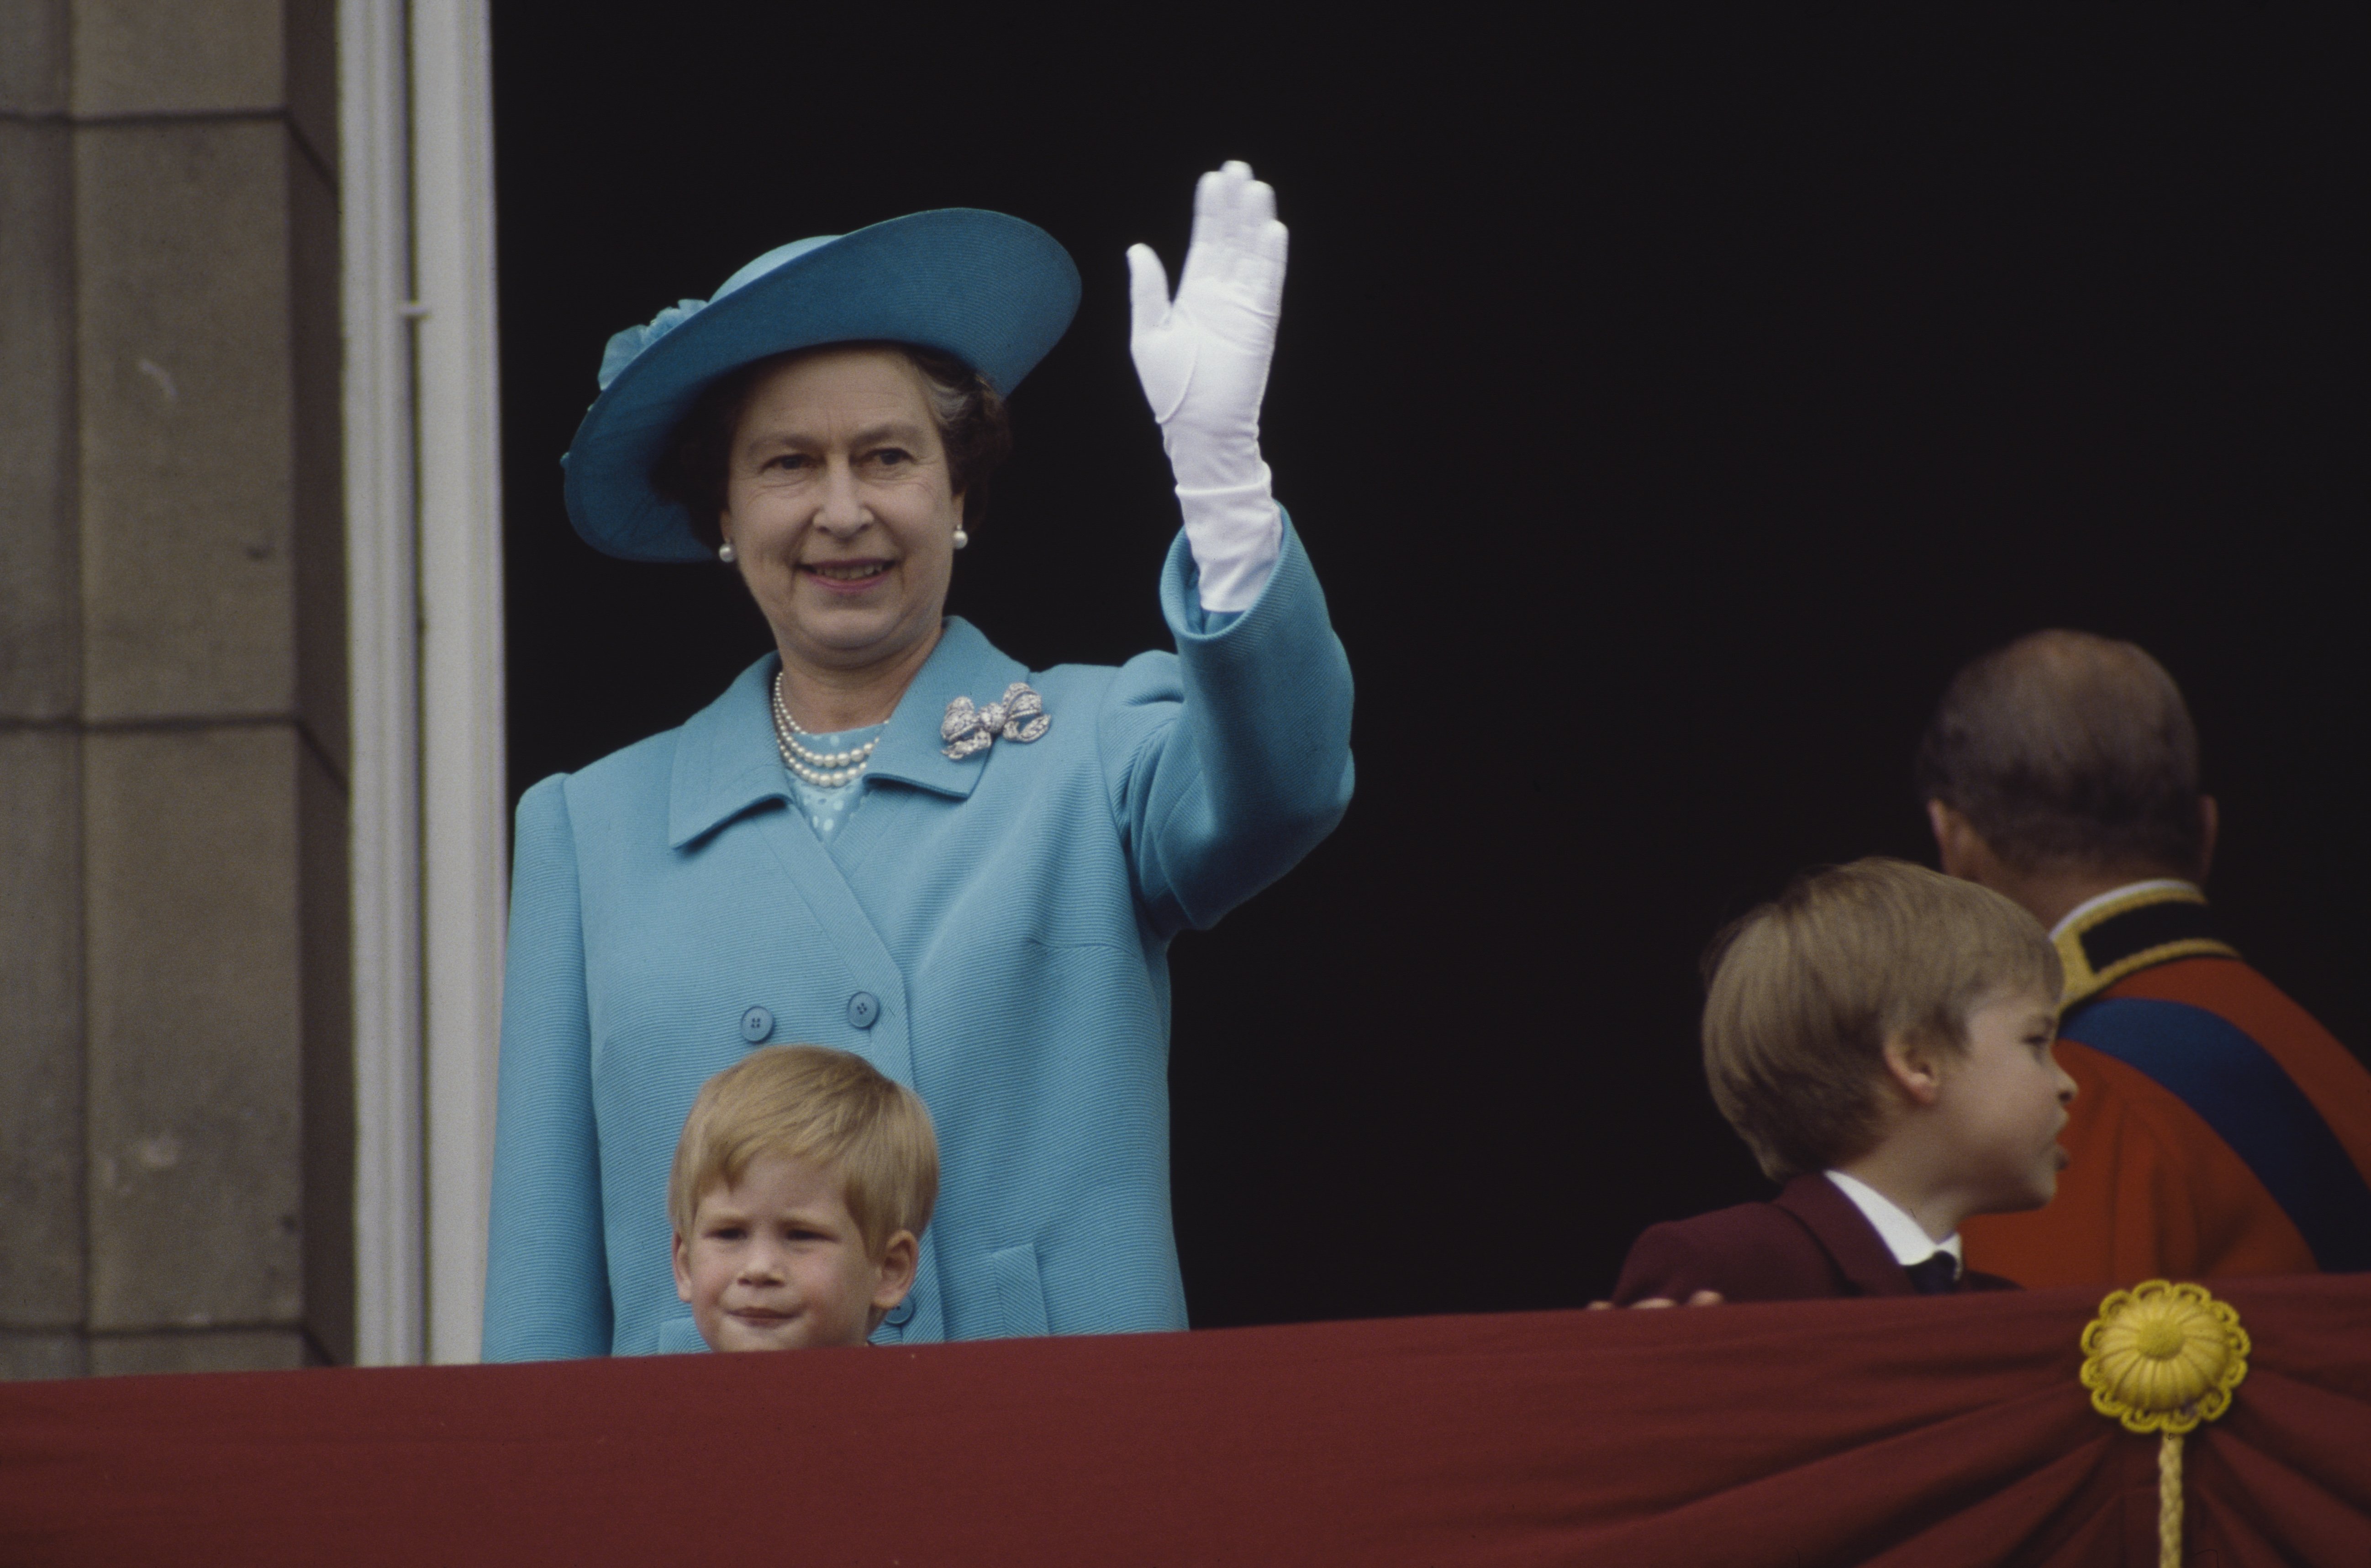 Queen Elizabeth II with Prince William and Prince Harry during the Trooping of the Color ceremony at Buckingham Palace in 1988 in London, England | Source: Getty Images